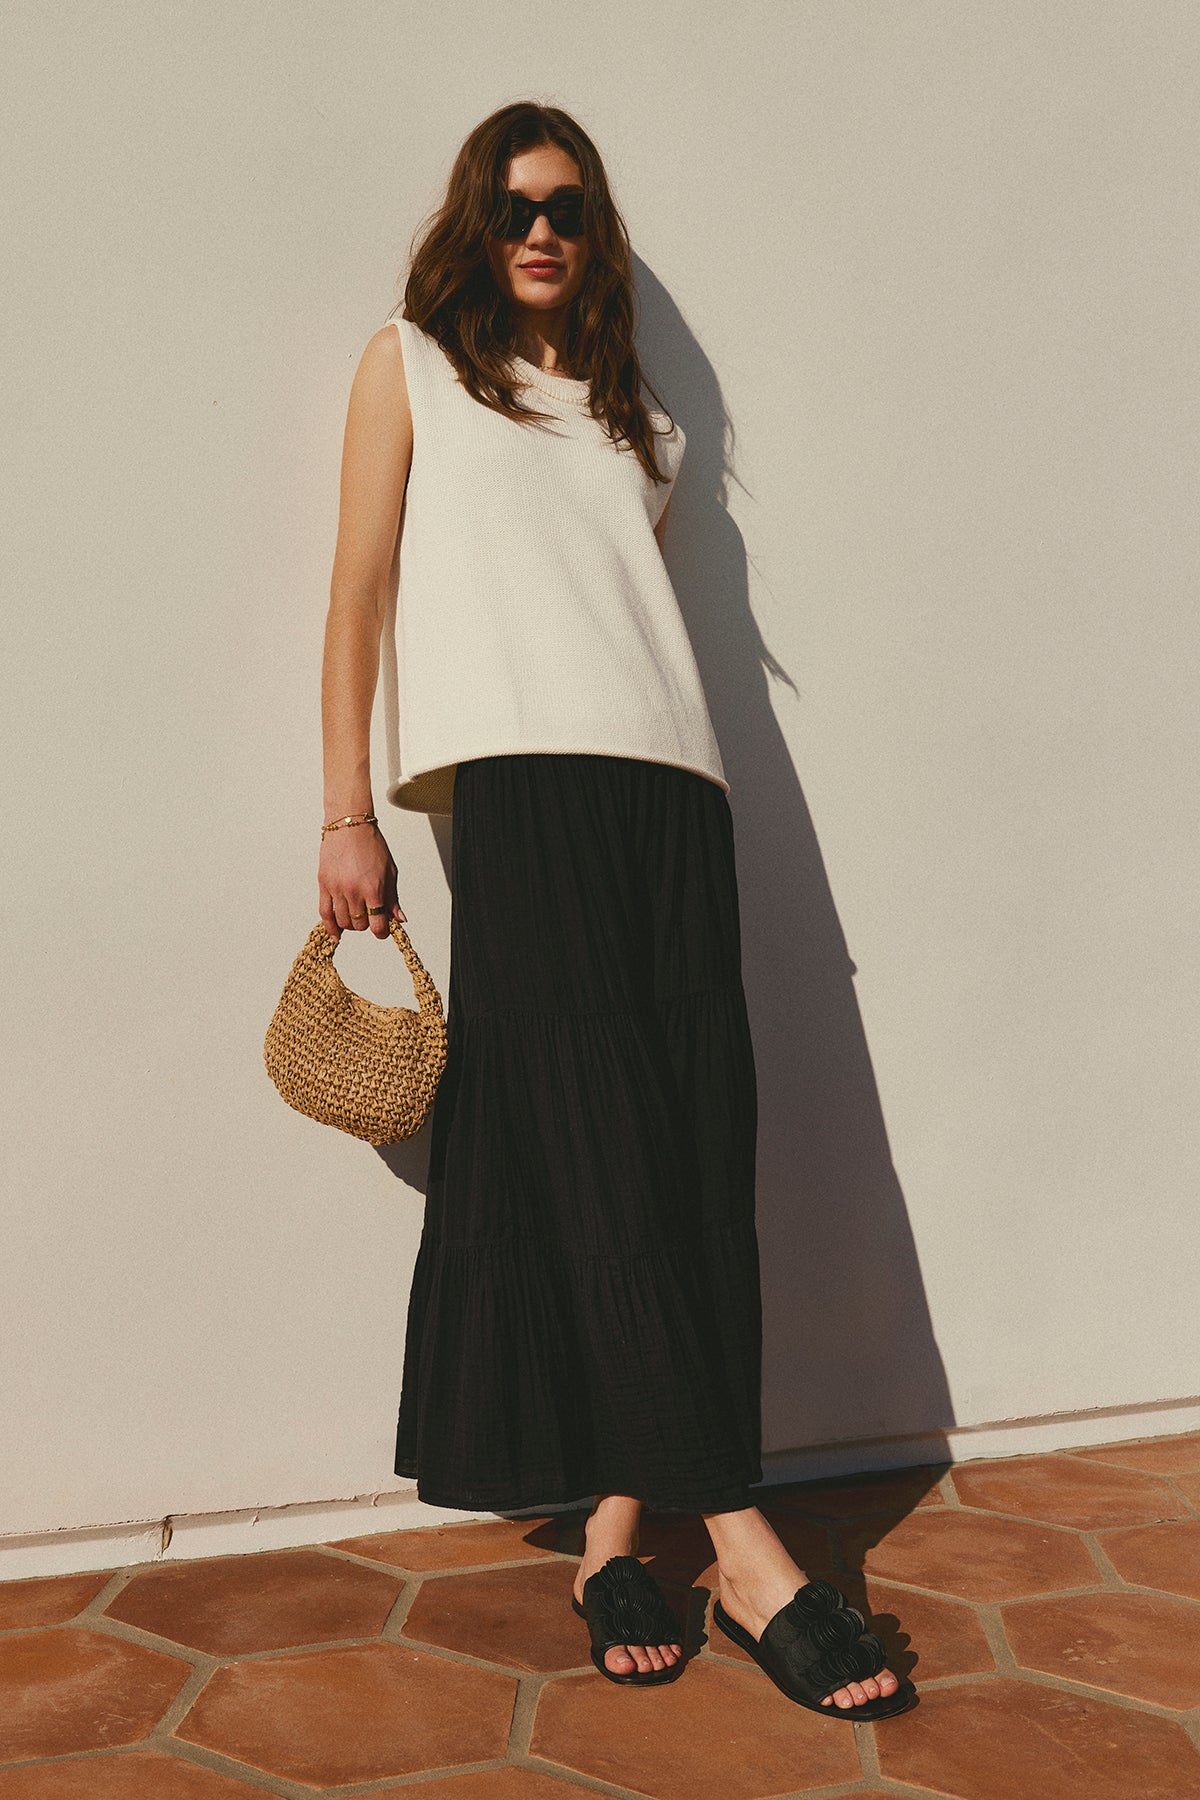   A woman in sunglasses, a white sleeveless top, and a DANIELLE COTTON GAUZE TIERED SKIRT from Velvet by Graham & Spencer stands on a tiled surface, holding a straw bag. 